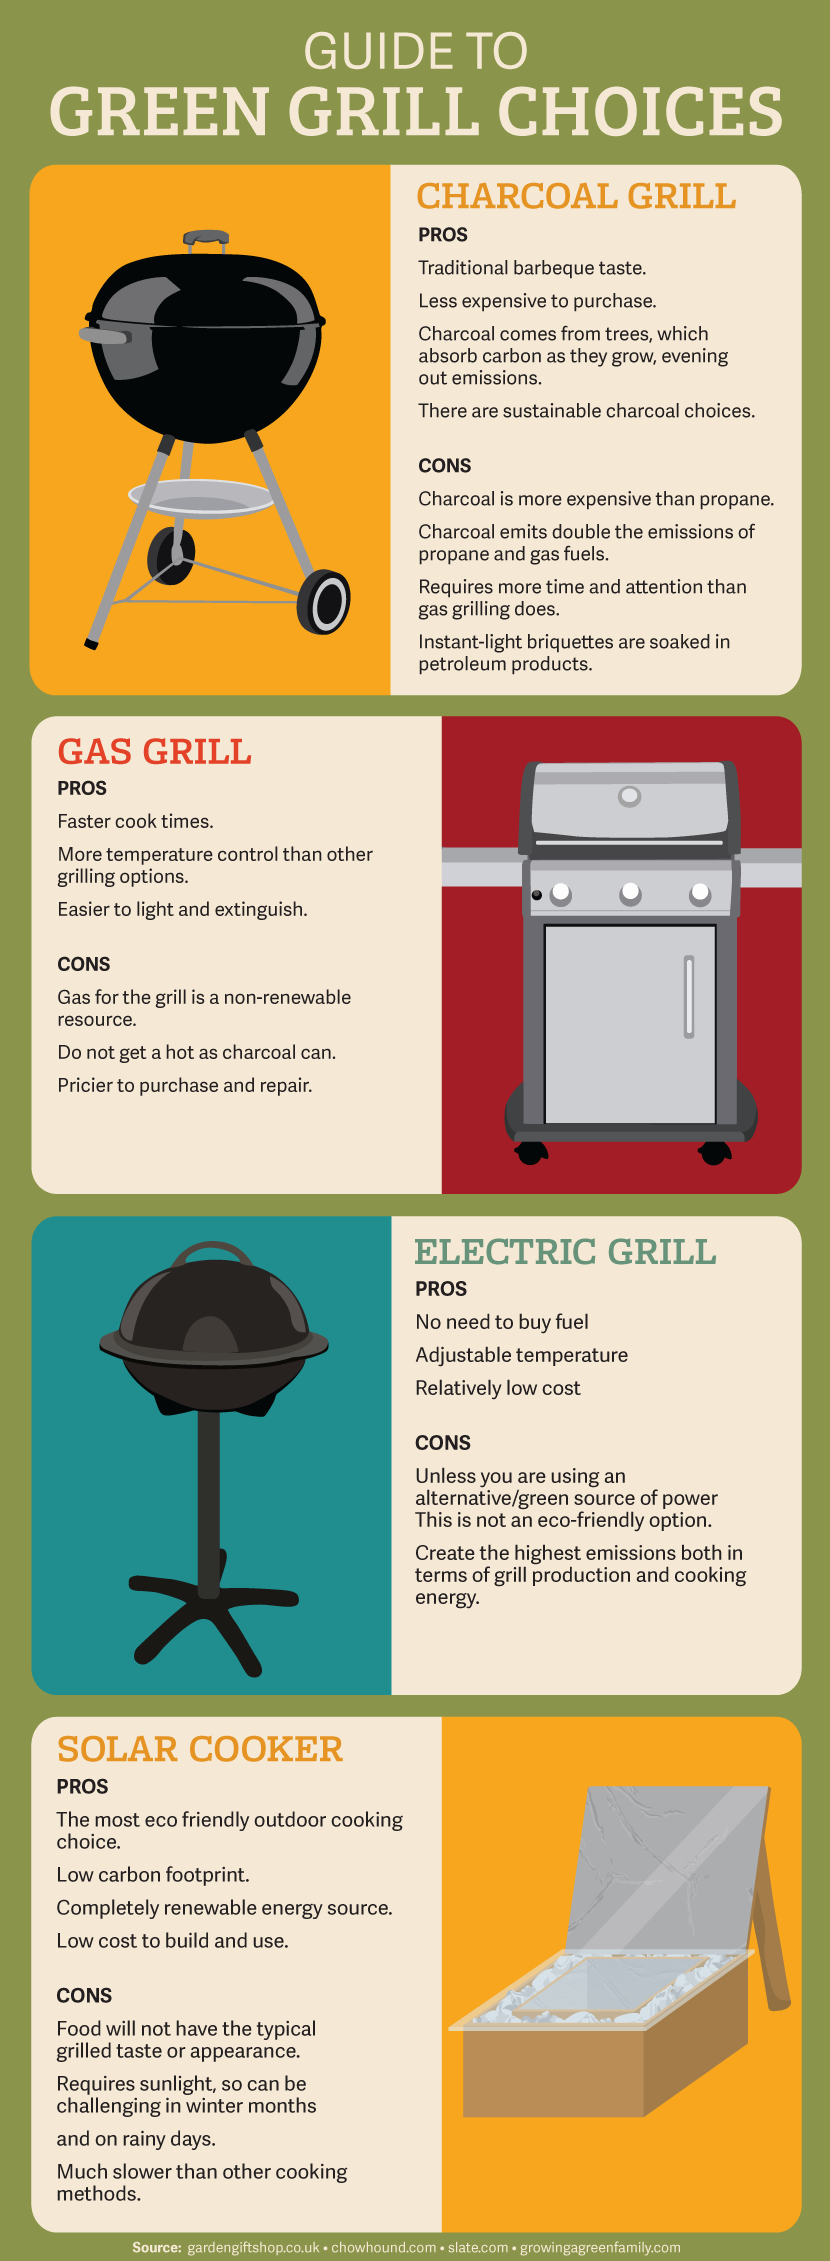 An Environmentally Friendly Guide To Grilling: Guide to Picking an Economically Friendly Grill